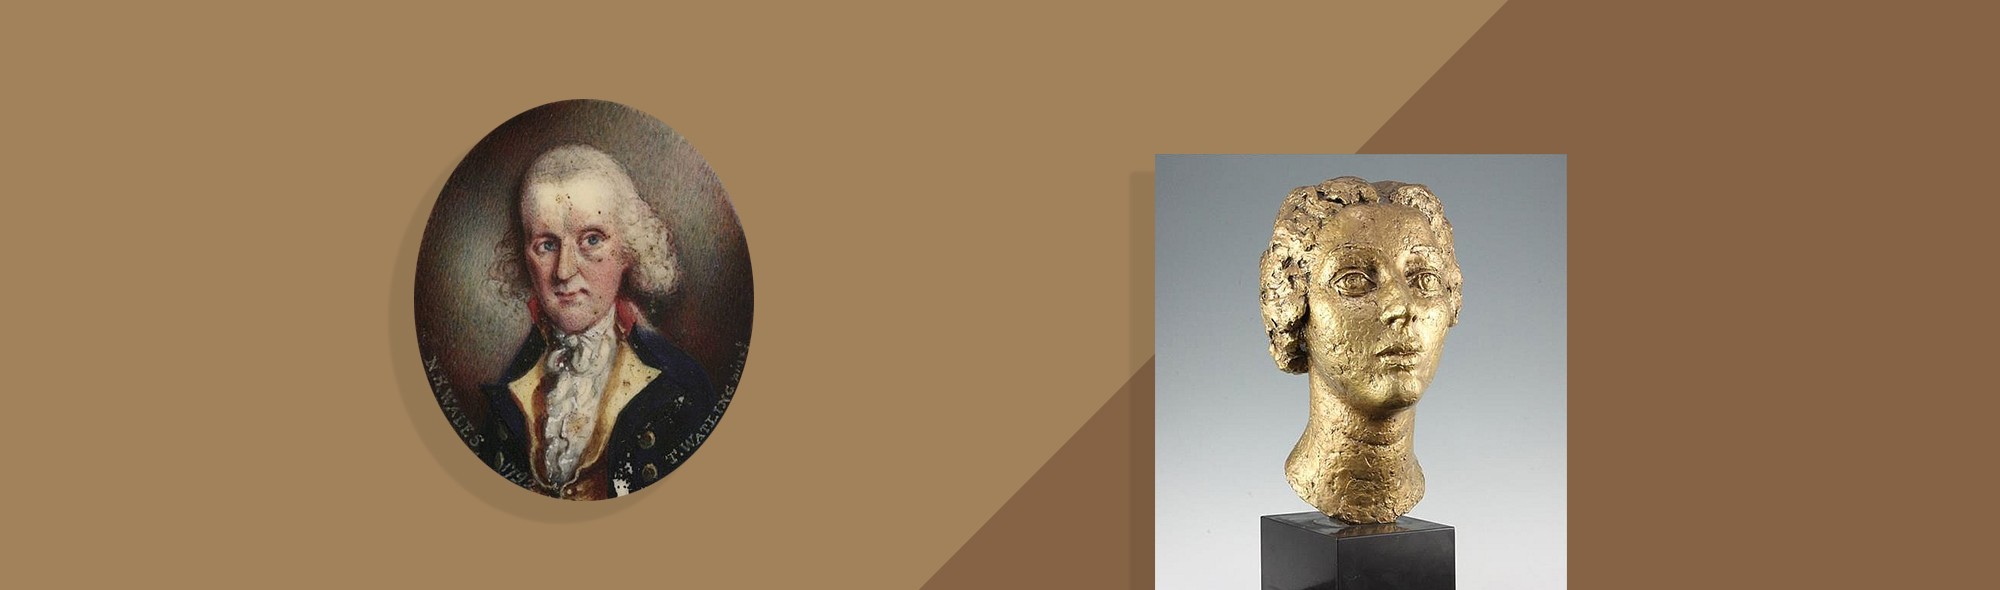 NS Wales portrait and gold head sculpture